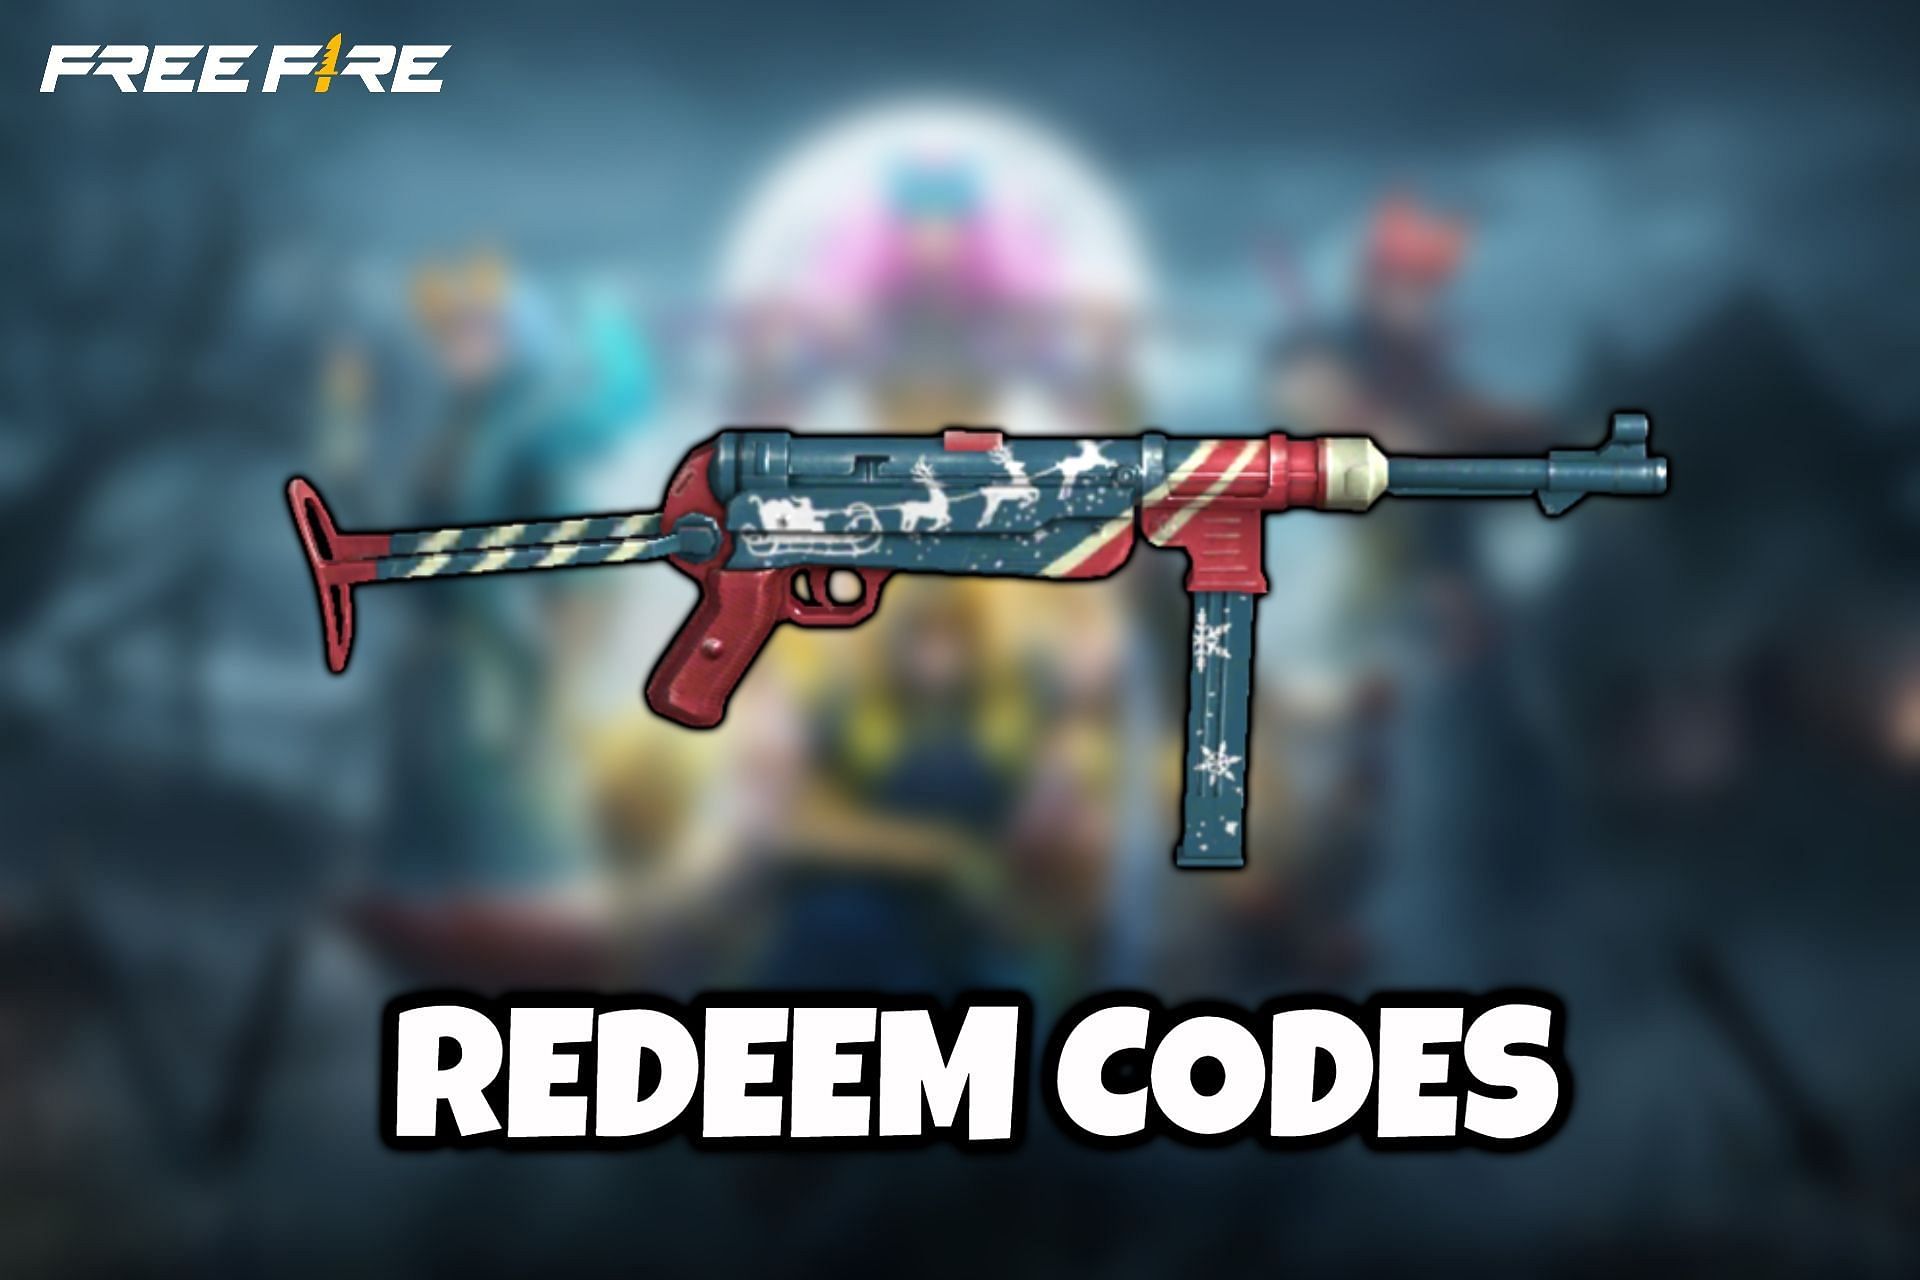 Redeem codes offers users a chance to get free gun skins and more Free Fire rewards (Image via Garena)